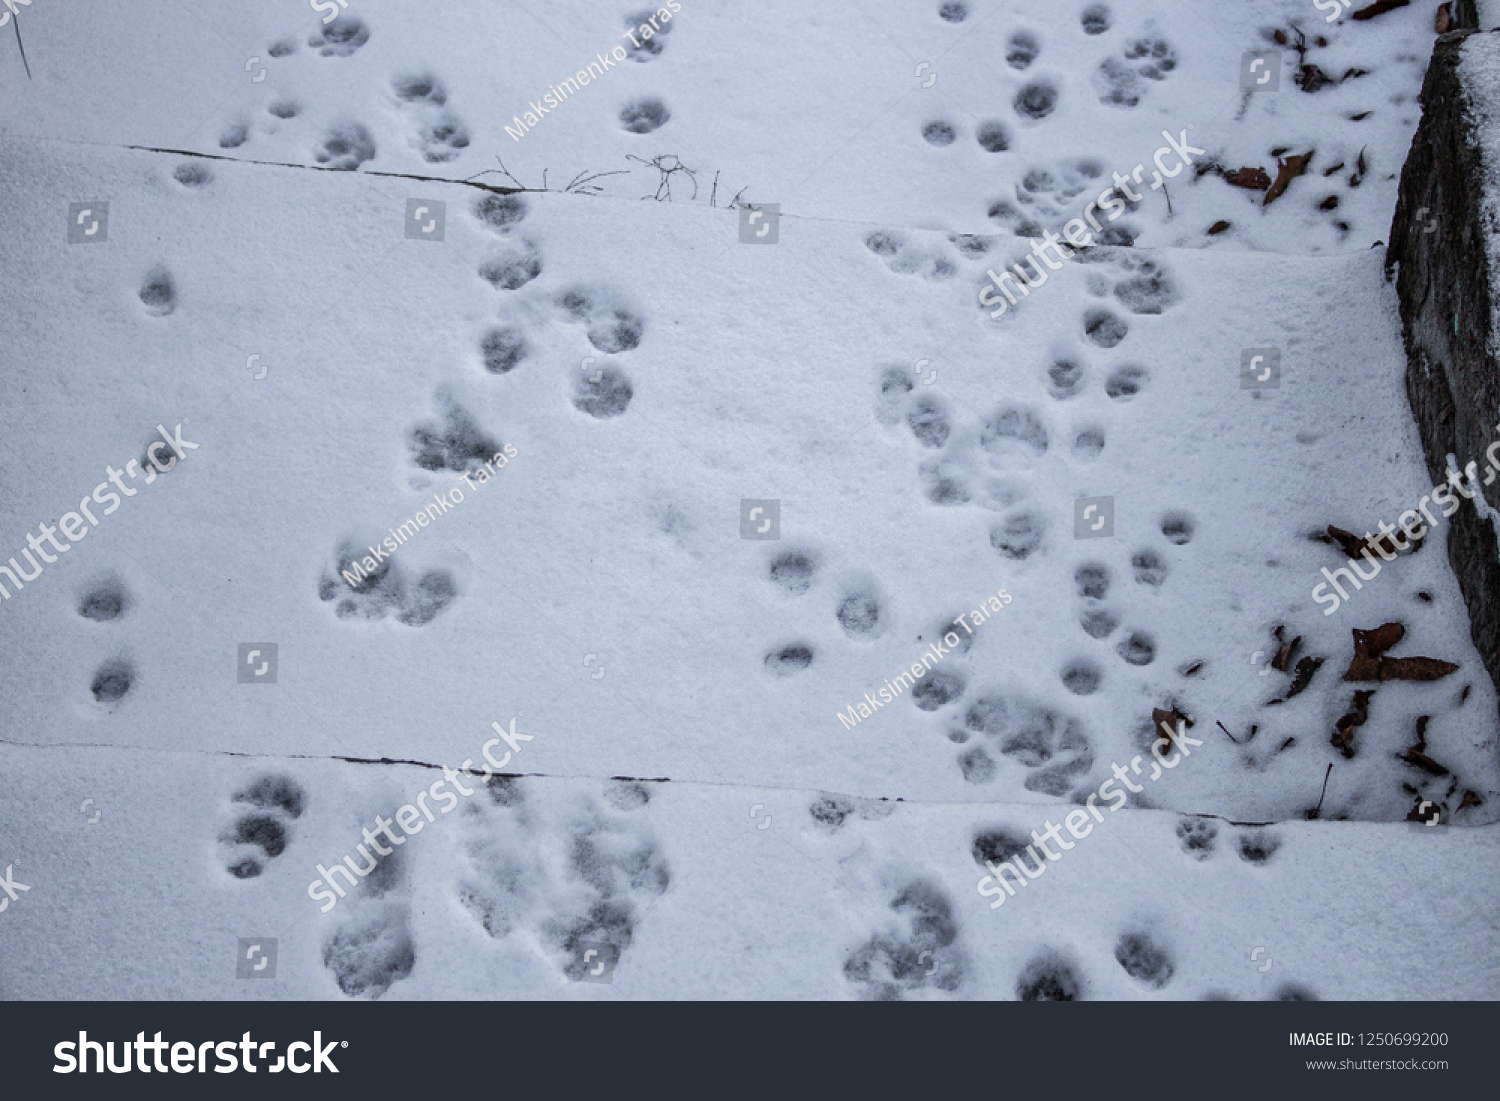 footprints of the animal in the snow, dog prints #1250699200